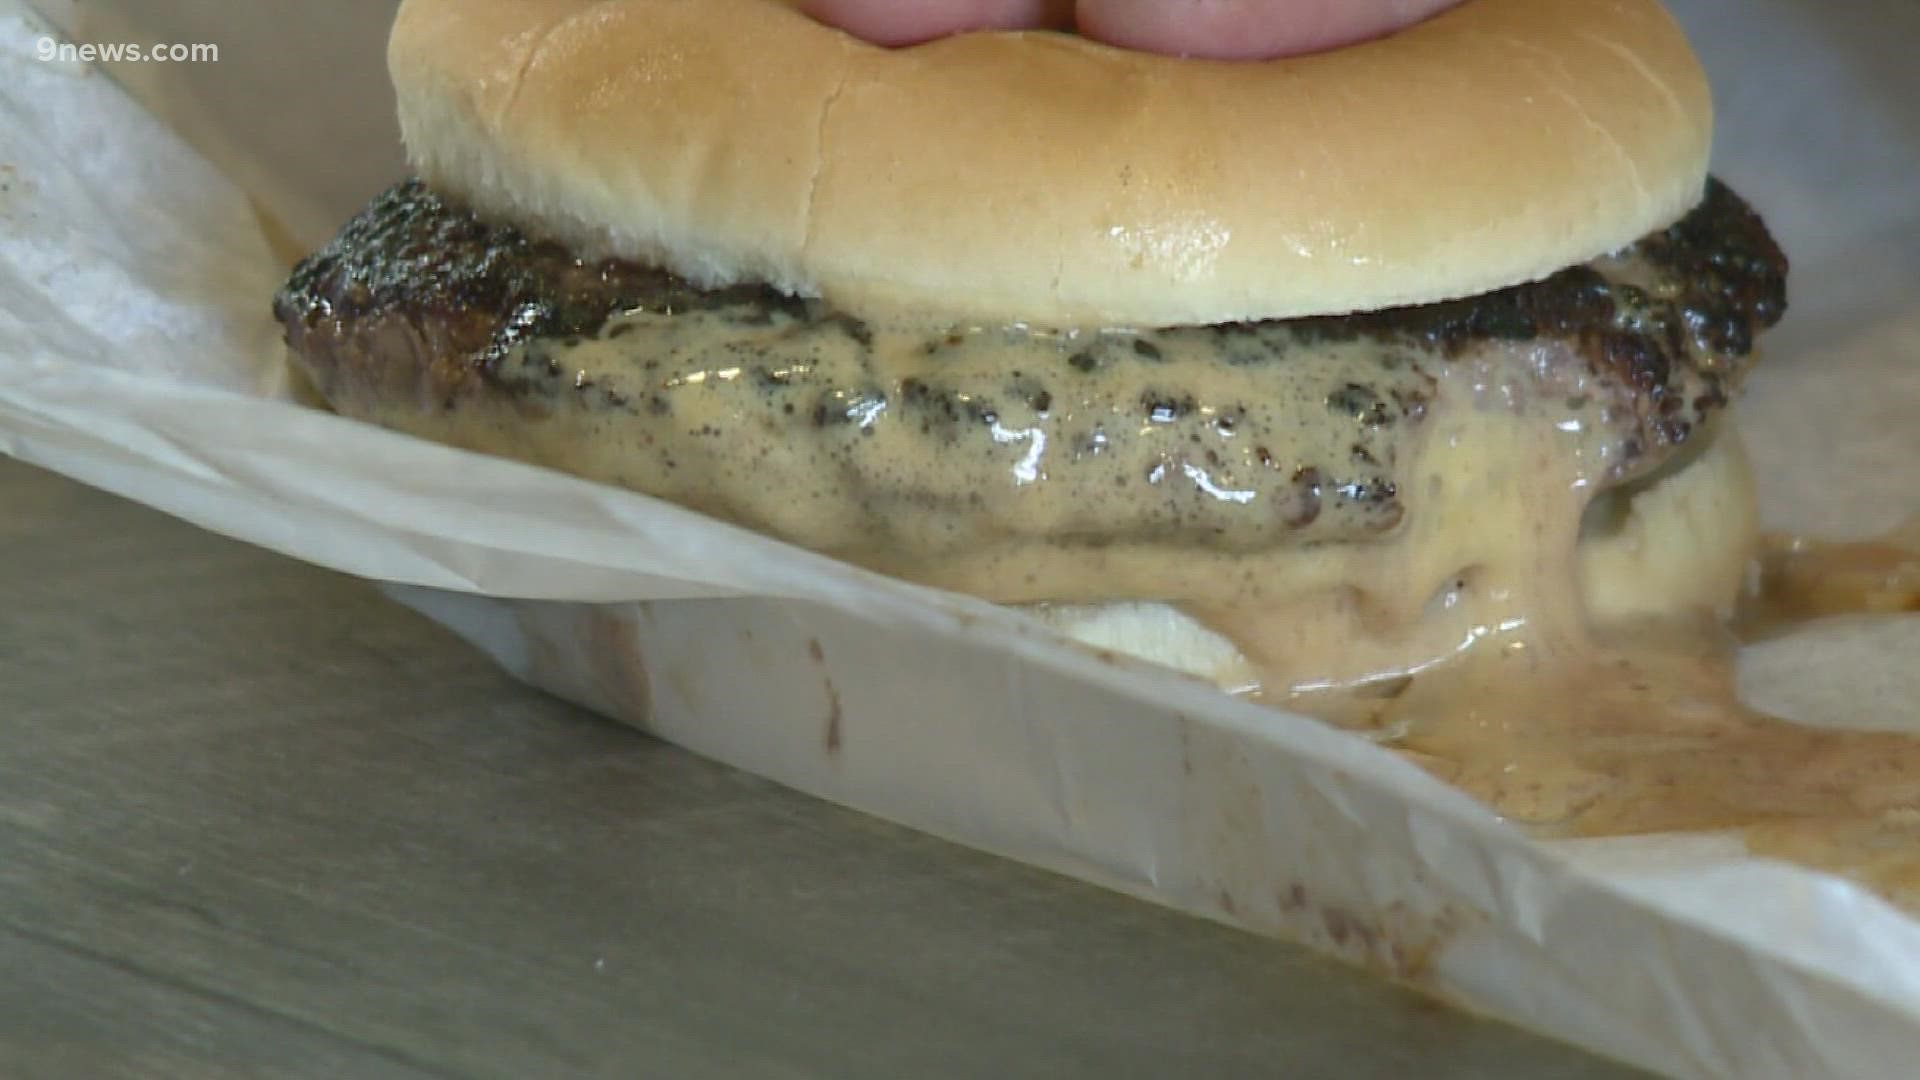 The Juicy Lucy is a cheese stuffed burger typically only found in the midwest. Now you can find it on Tennyson Street in Denver.